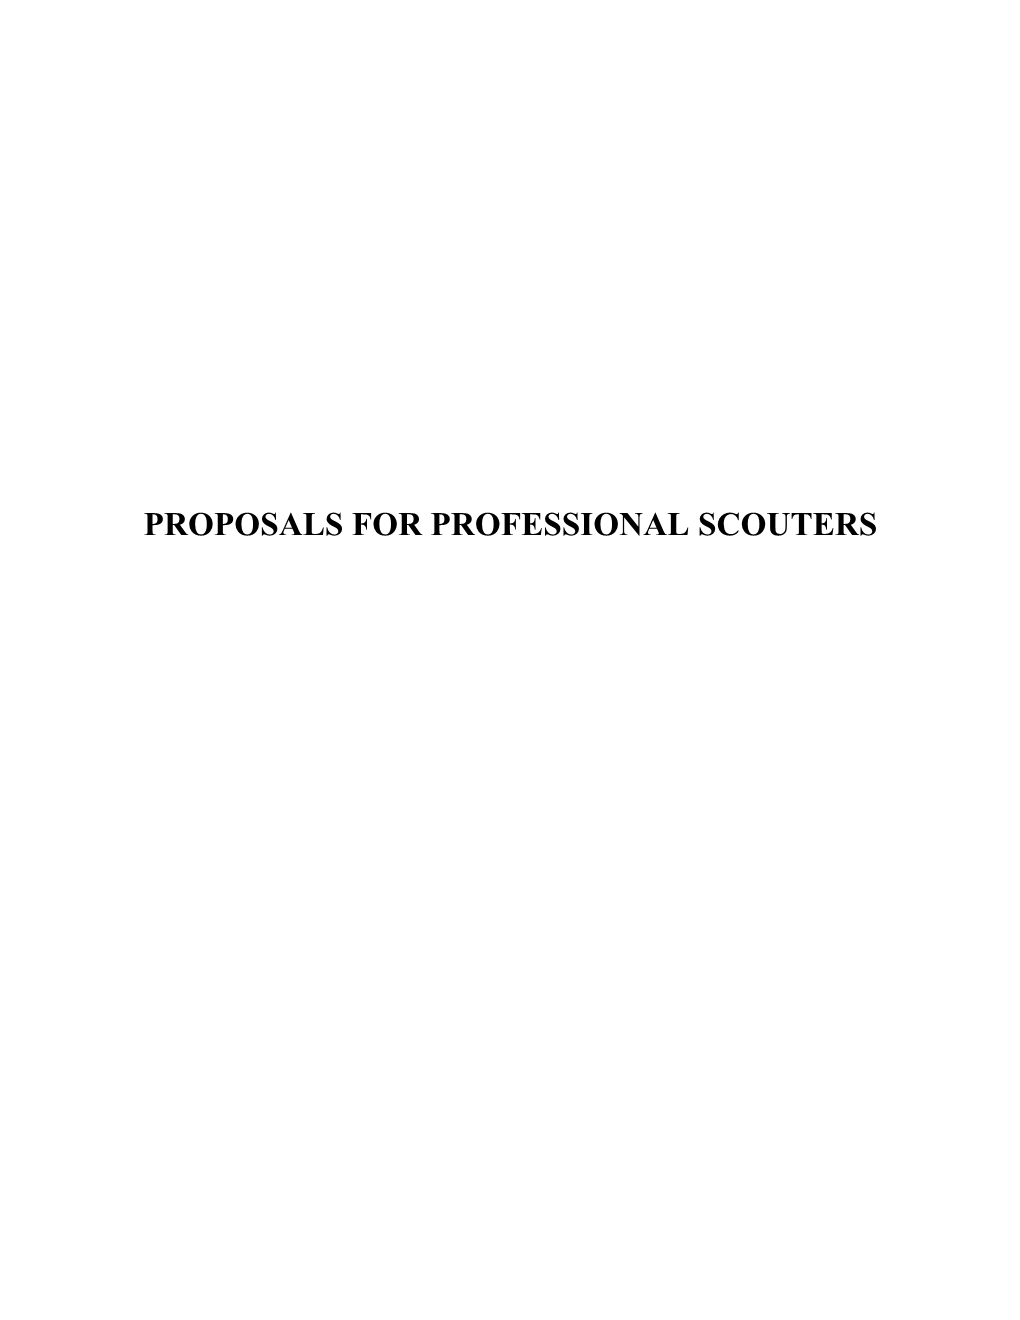 Proposals for Professional Scouters